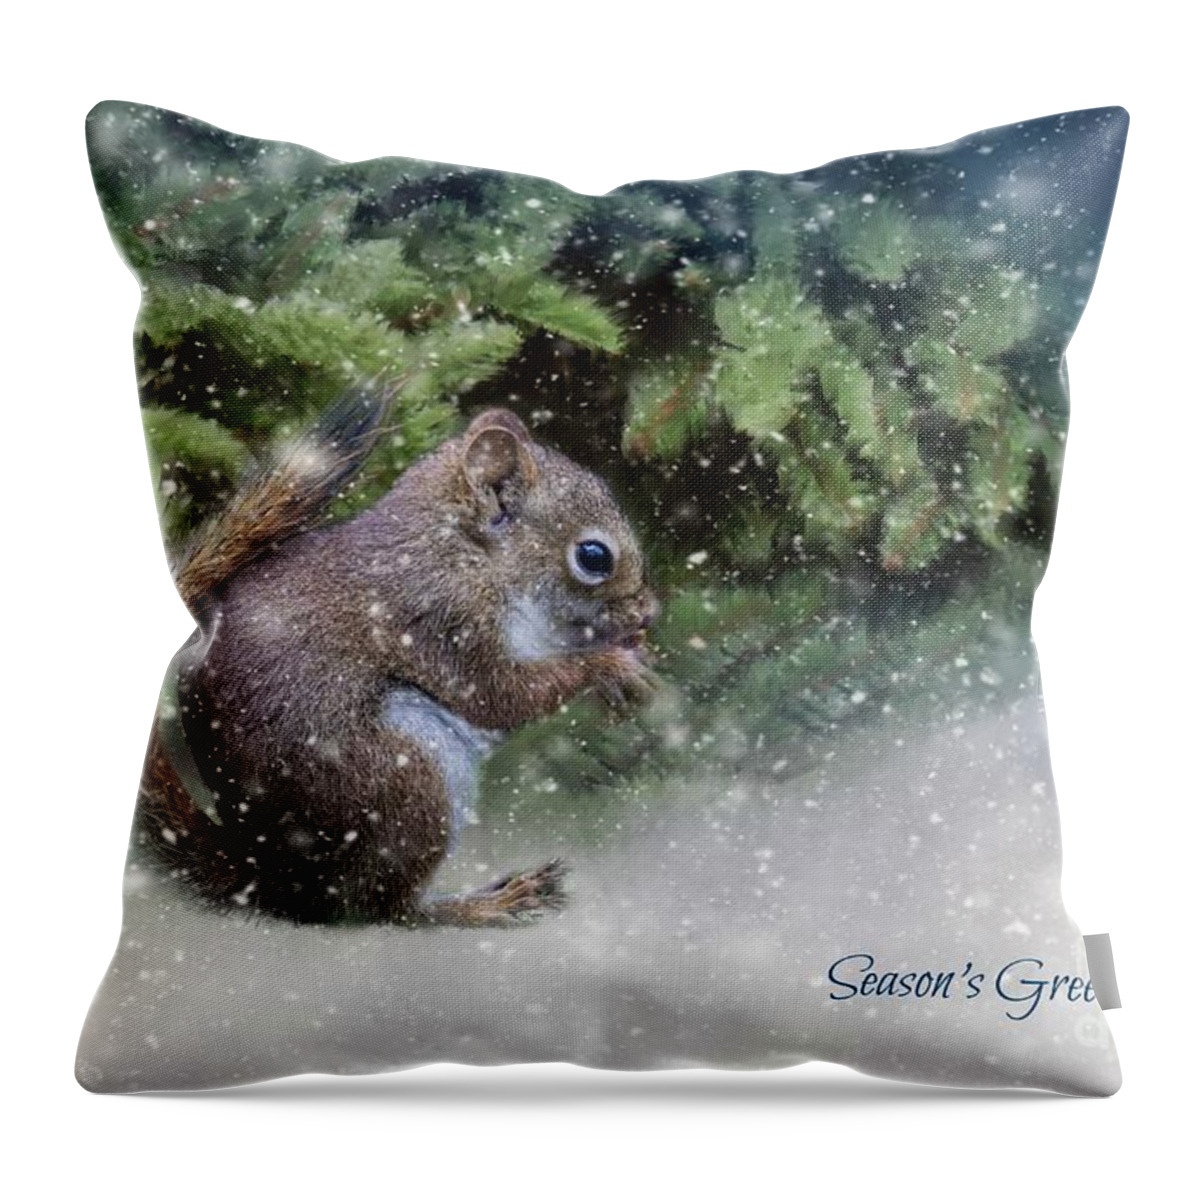 Squirrel Throw Pillow featuring the photograph Season's Greetings by Eva Lechner